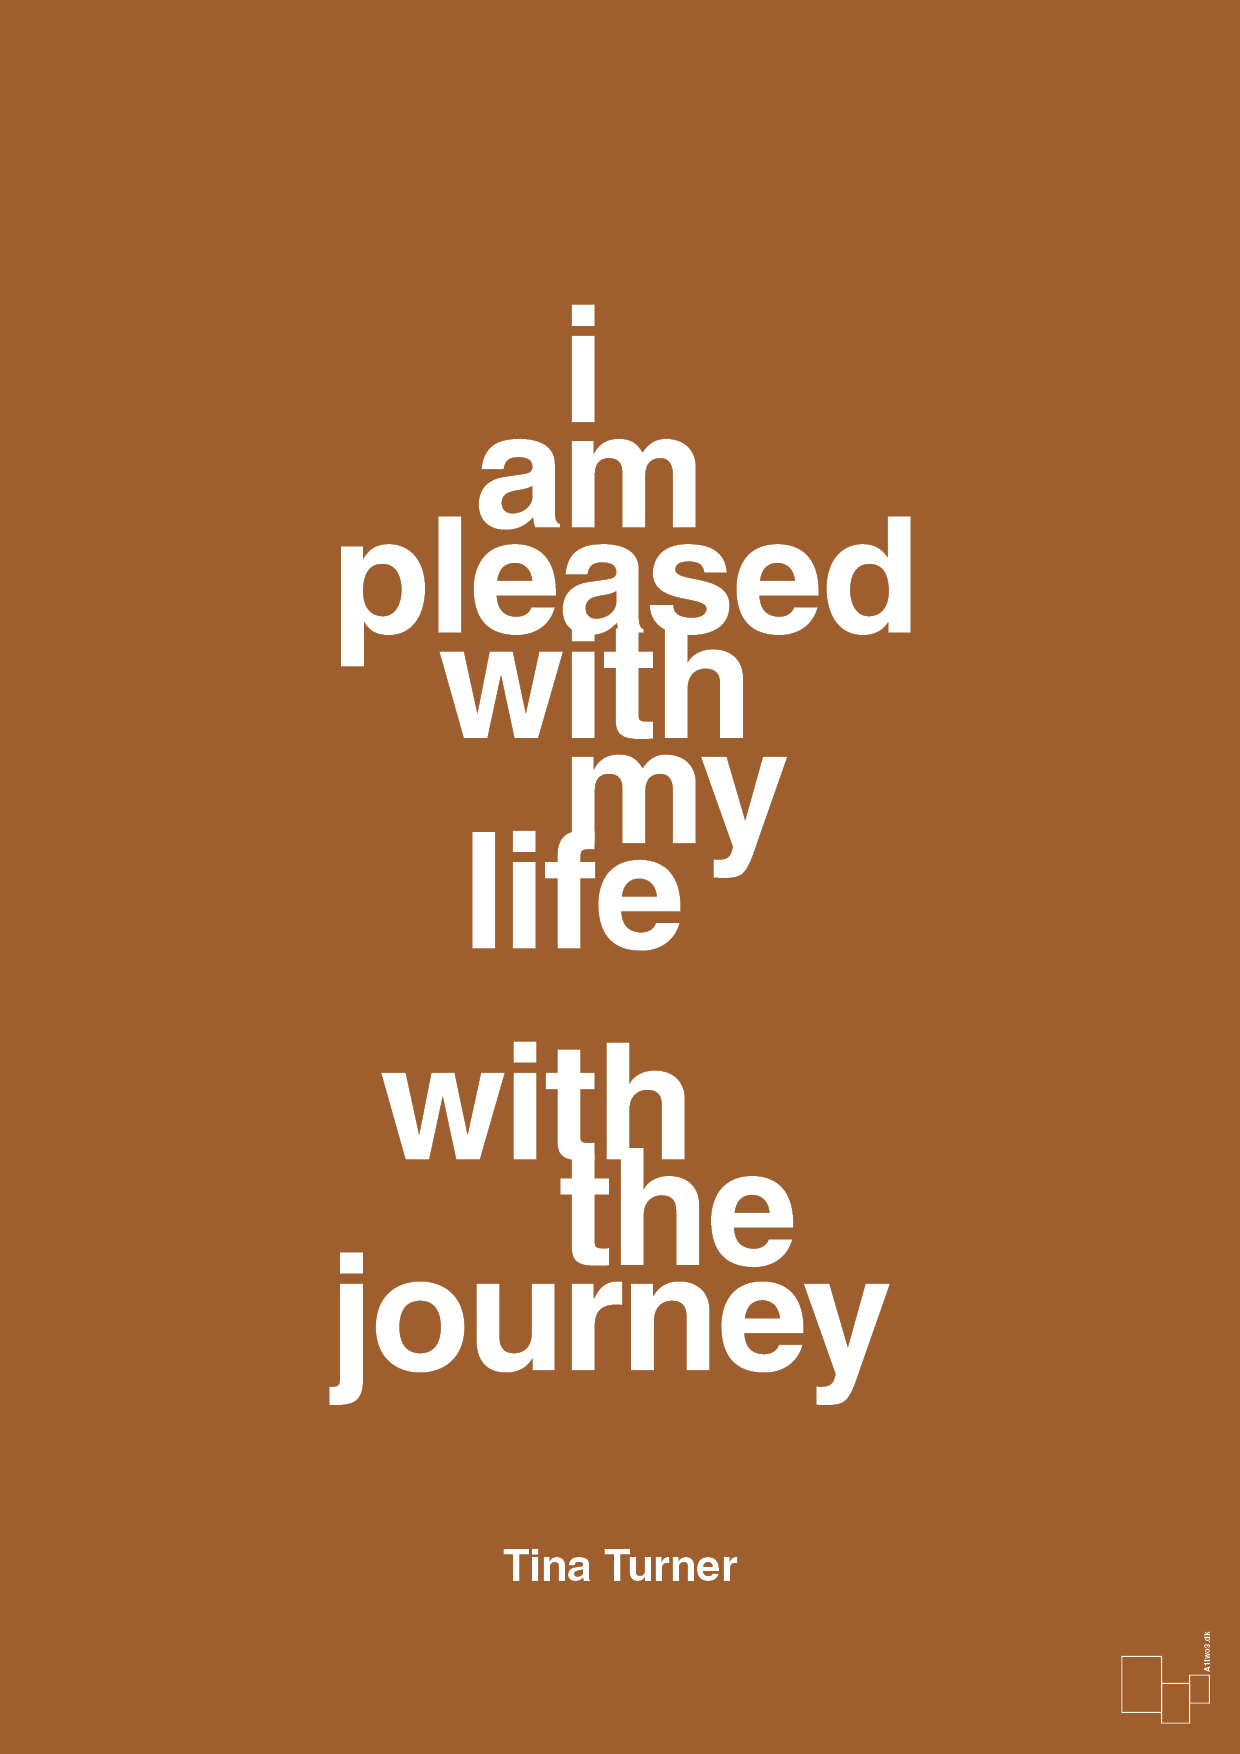 i am pleased with my life with the journey - Plakat med Citater i Cognac